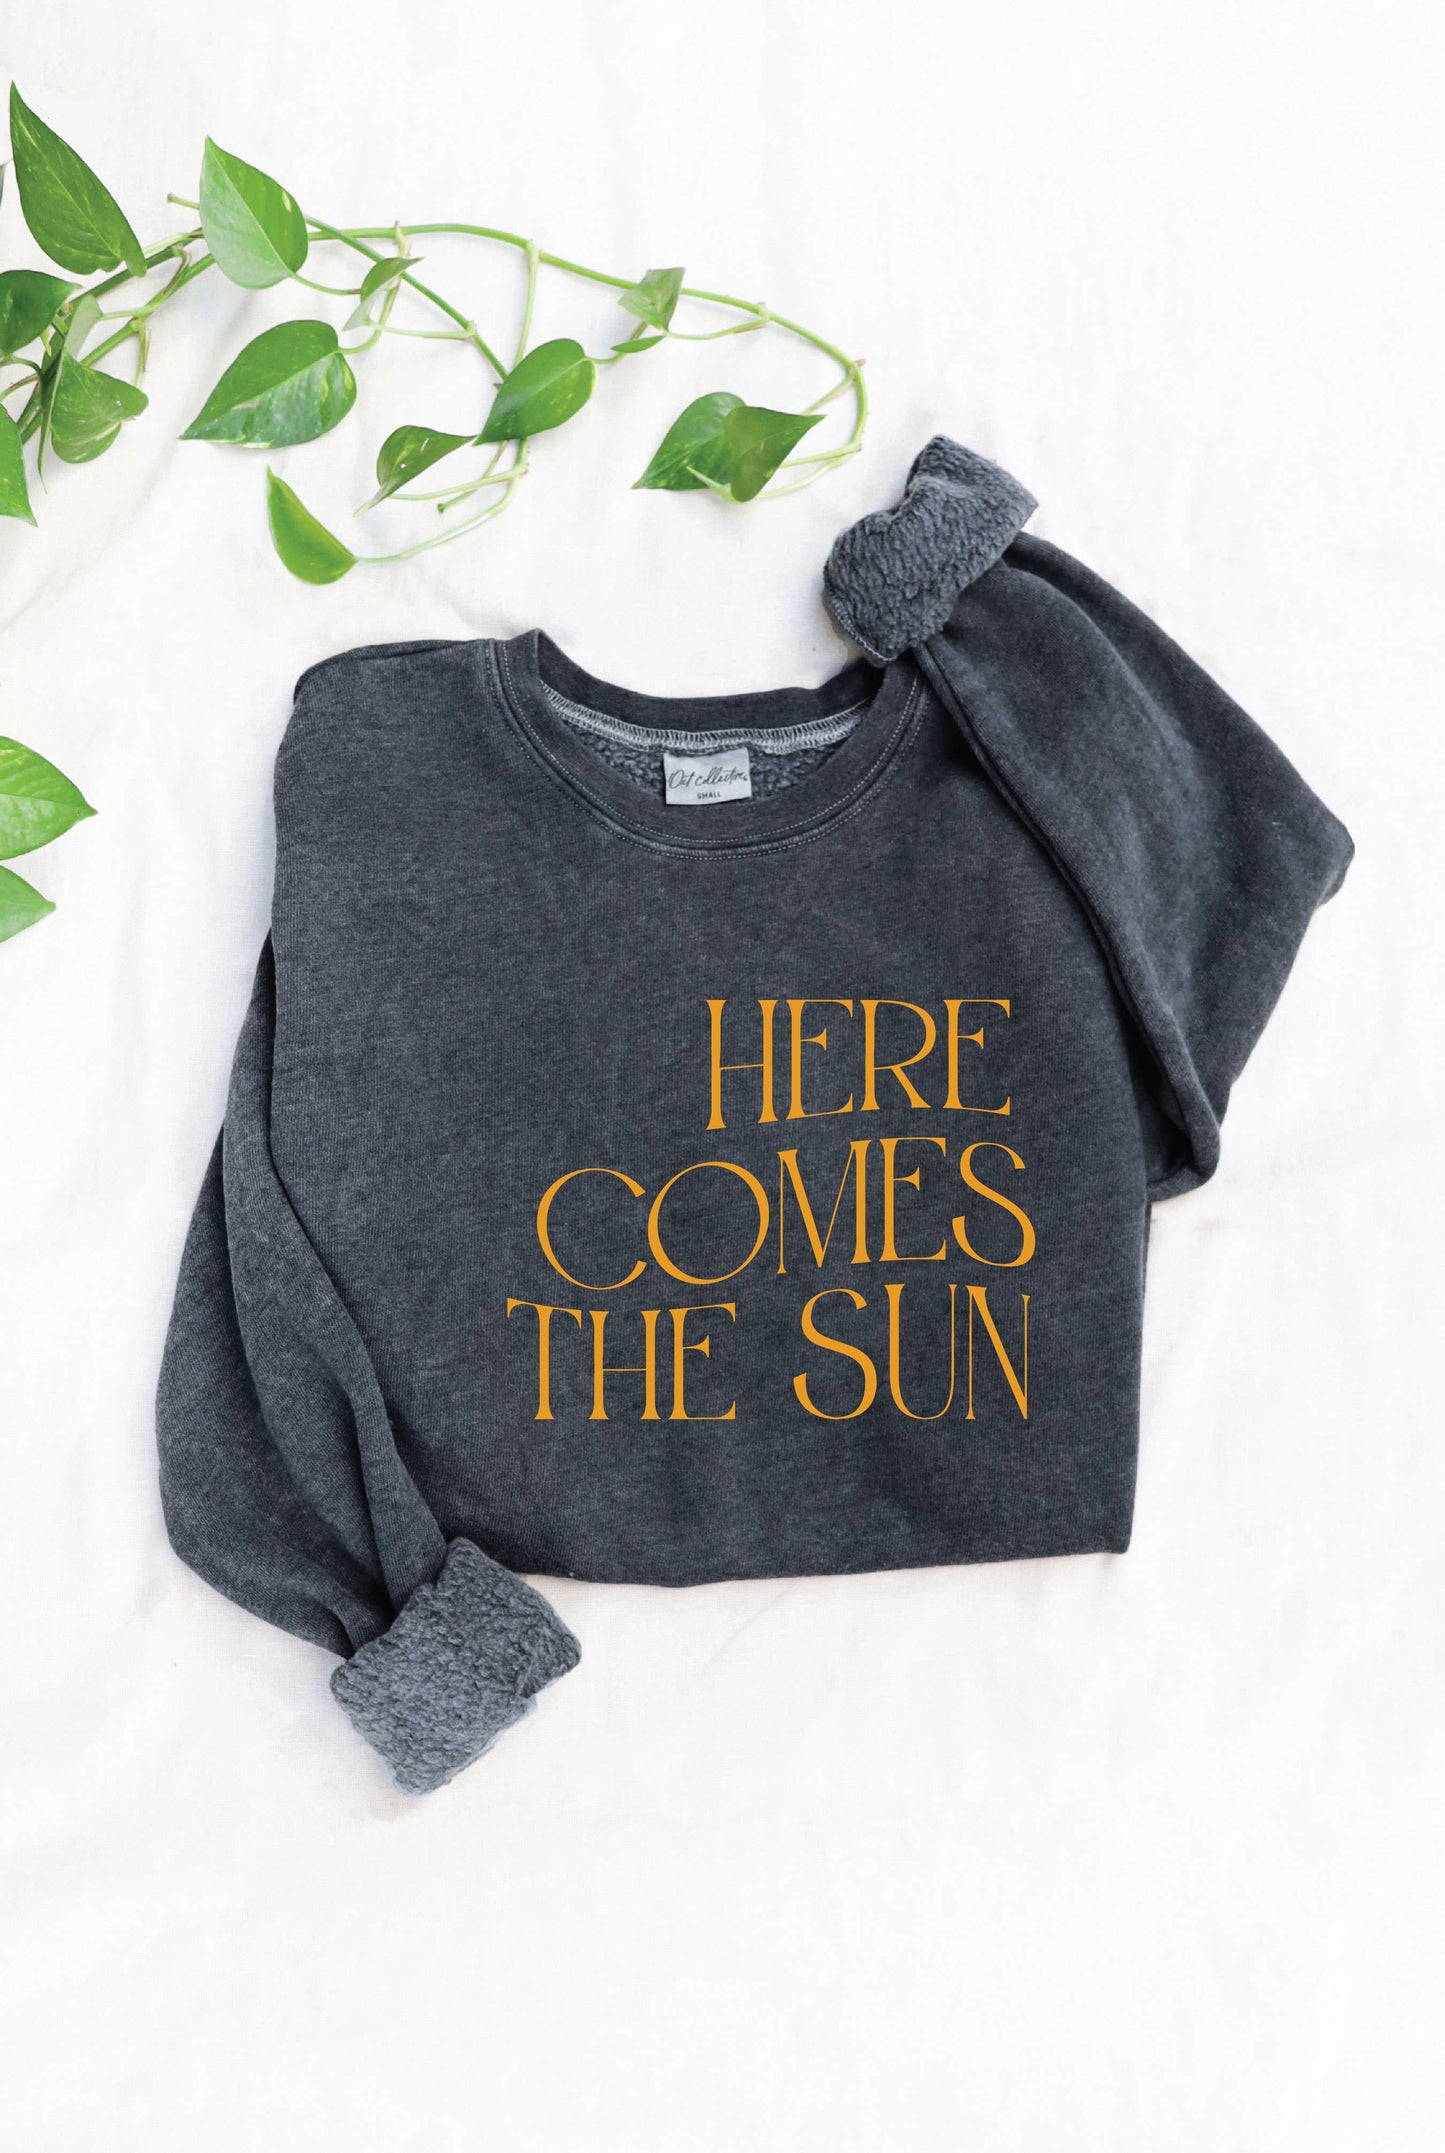 HERE COMES THE SUN Mineral Graphic Sweatshirt: VINTAGE BLACK Spring-Summer OAT COLLECTIVE